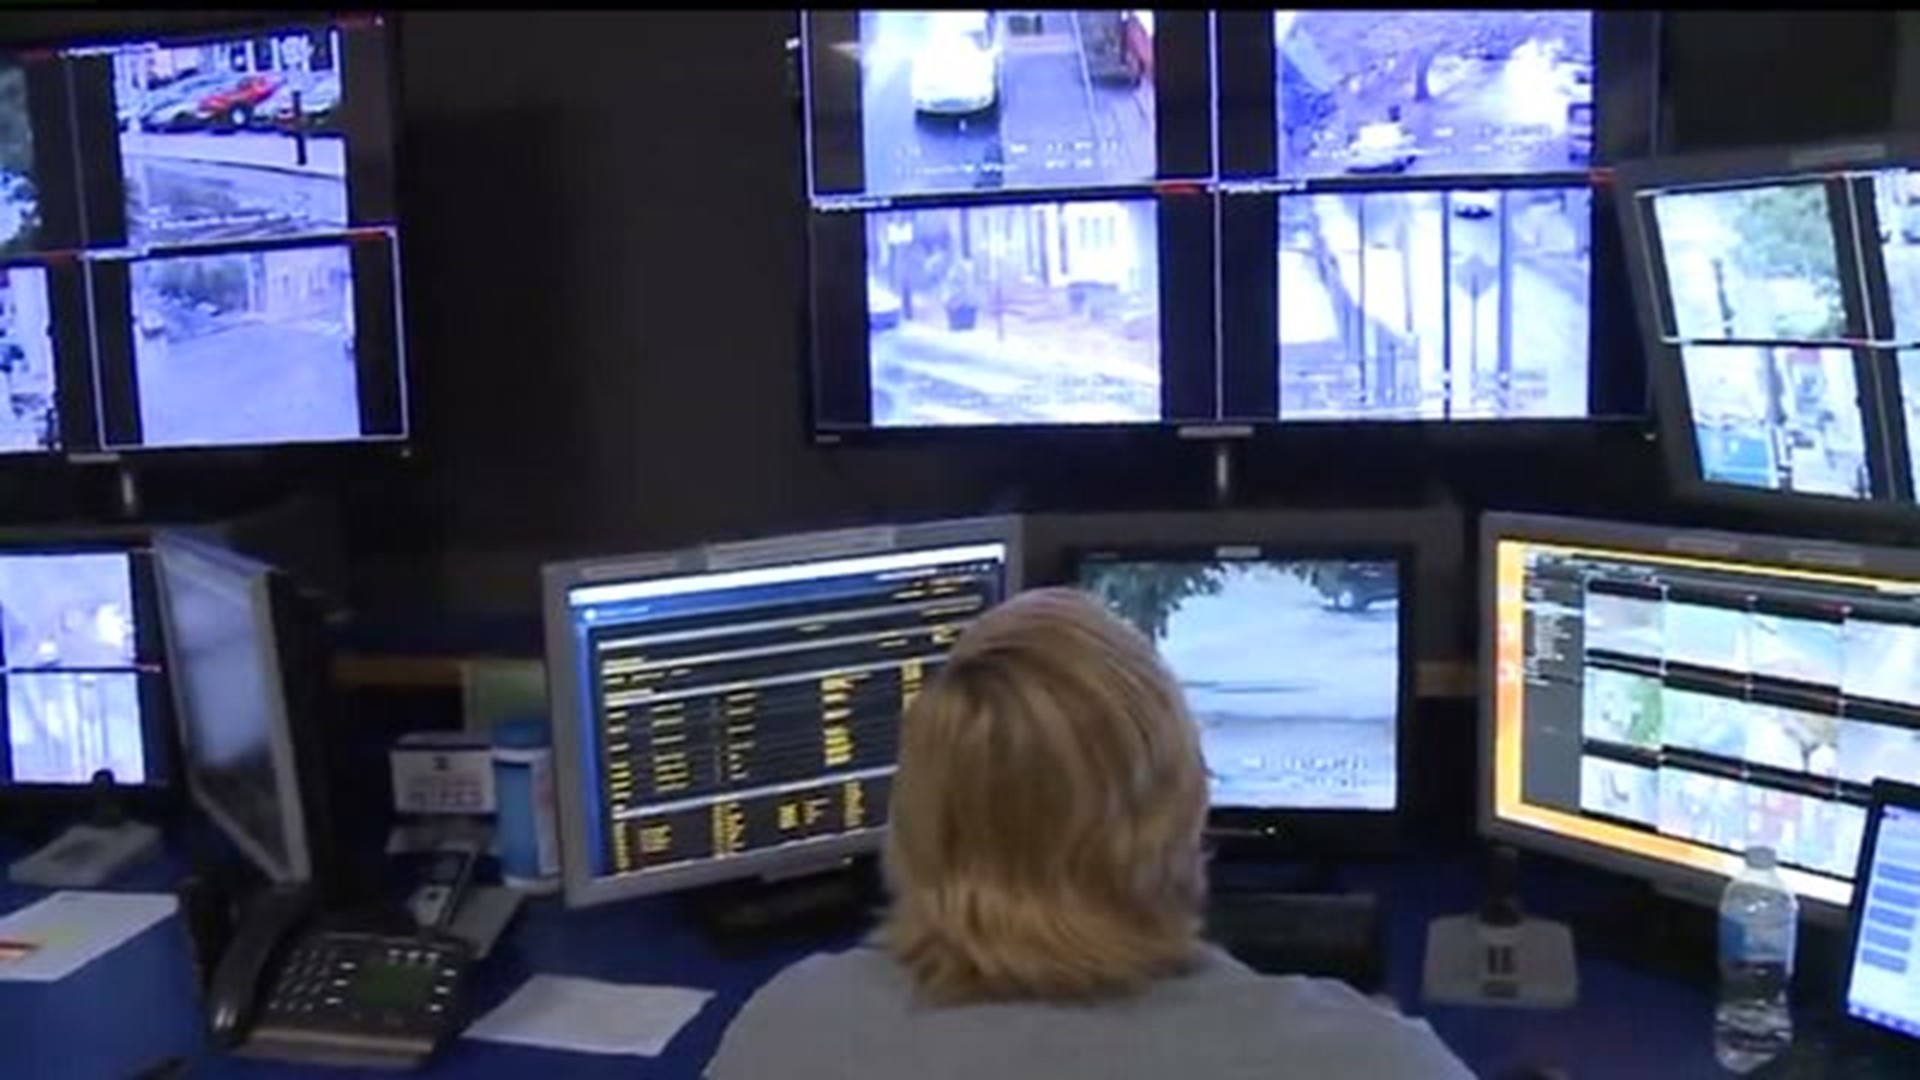 Lancaster officials support surveillance in light of recent shootings